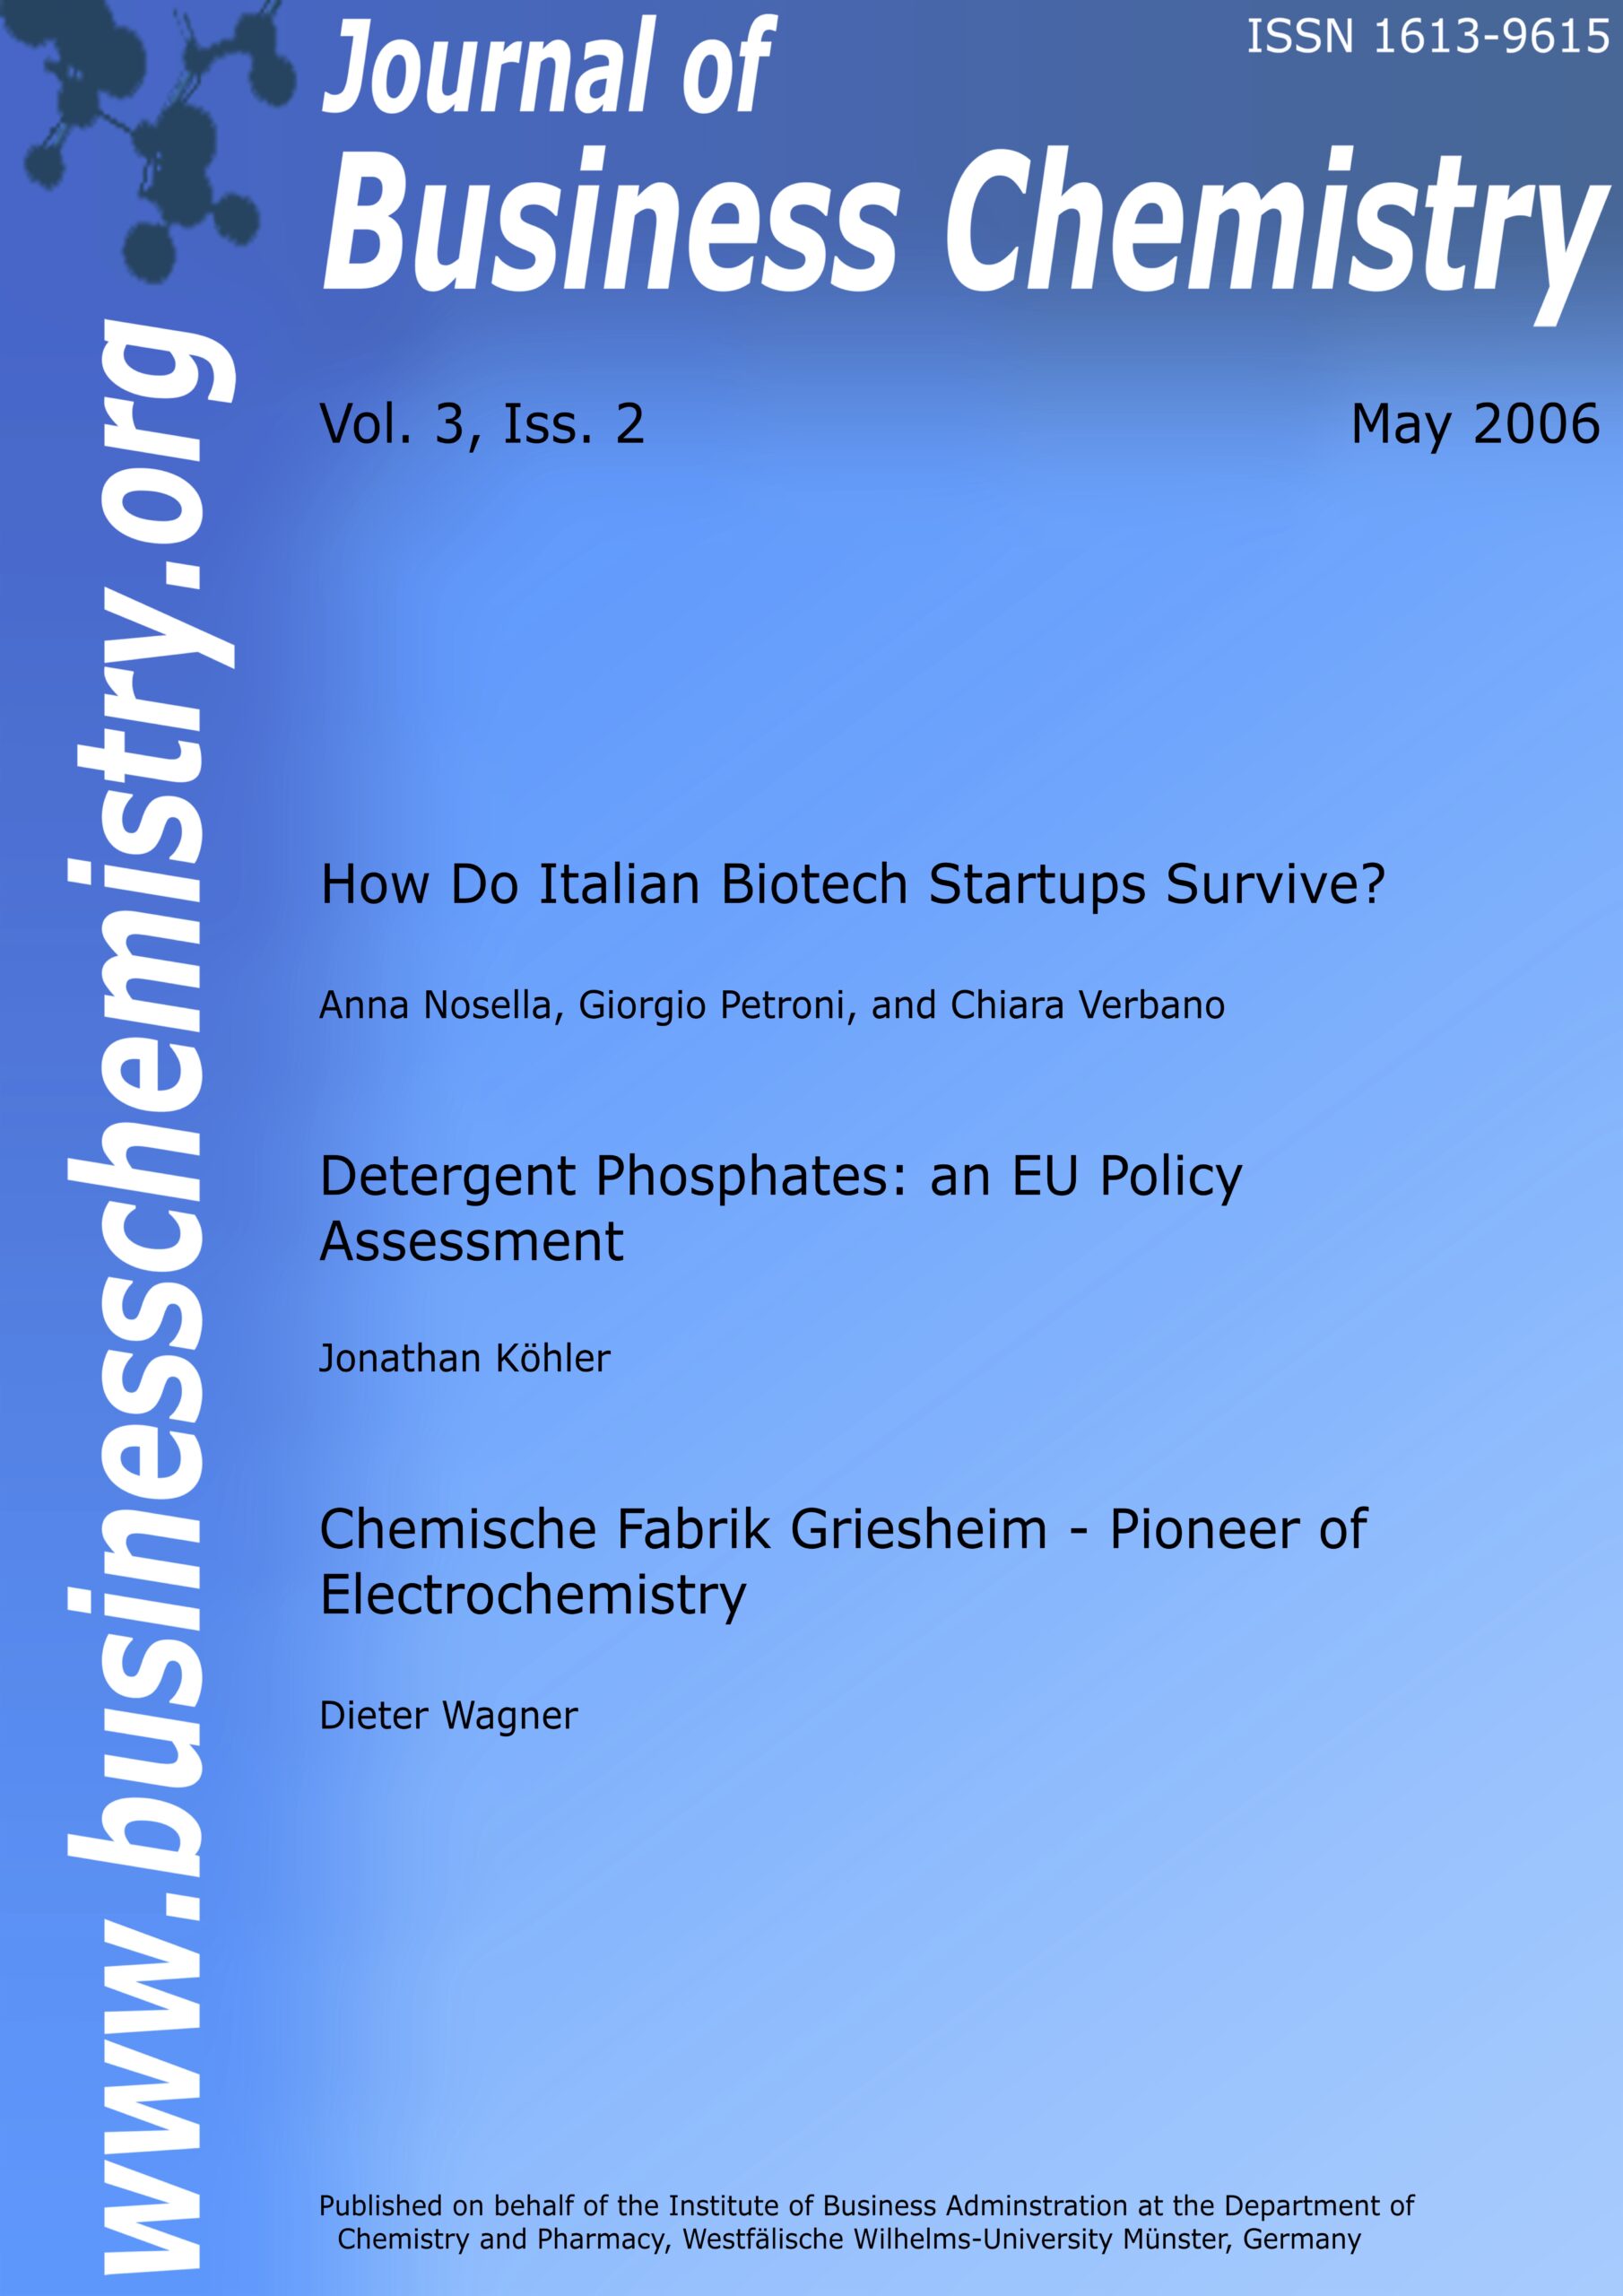 Journal of Business Chemistry May 2006